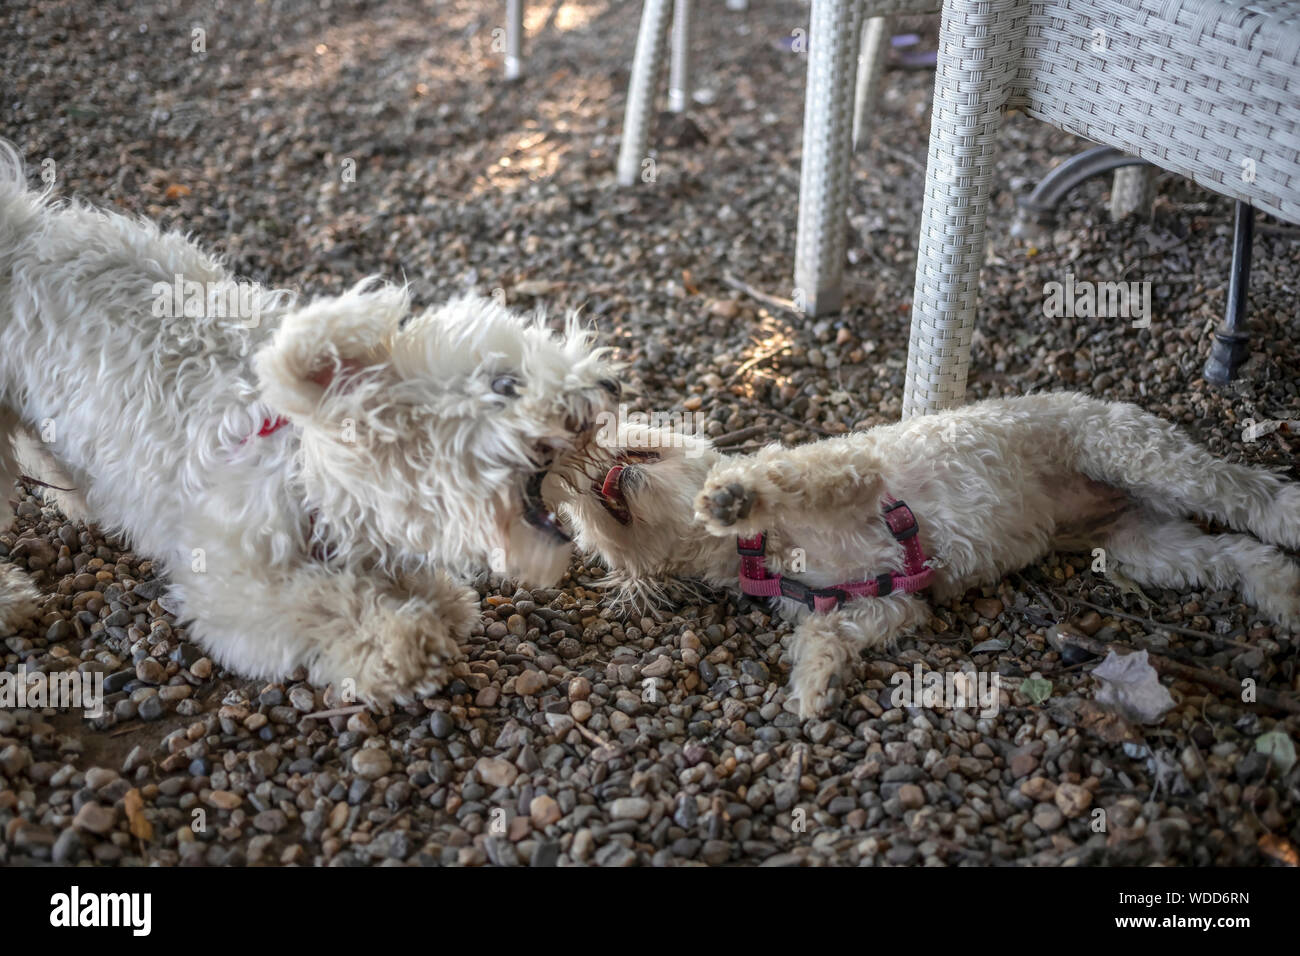 Nanja, Bichon Bolognese doggie (left), and Maltese dog Baky playing at the coffee shop terrace Stock Photo